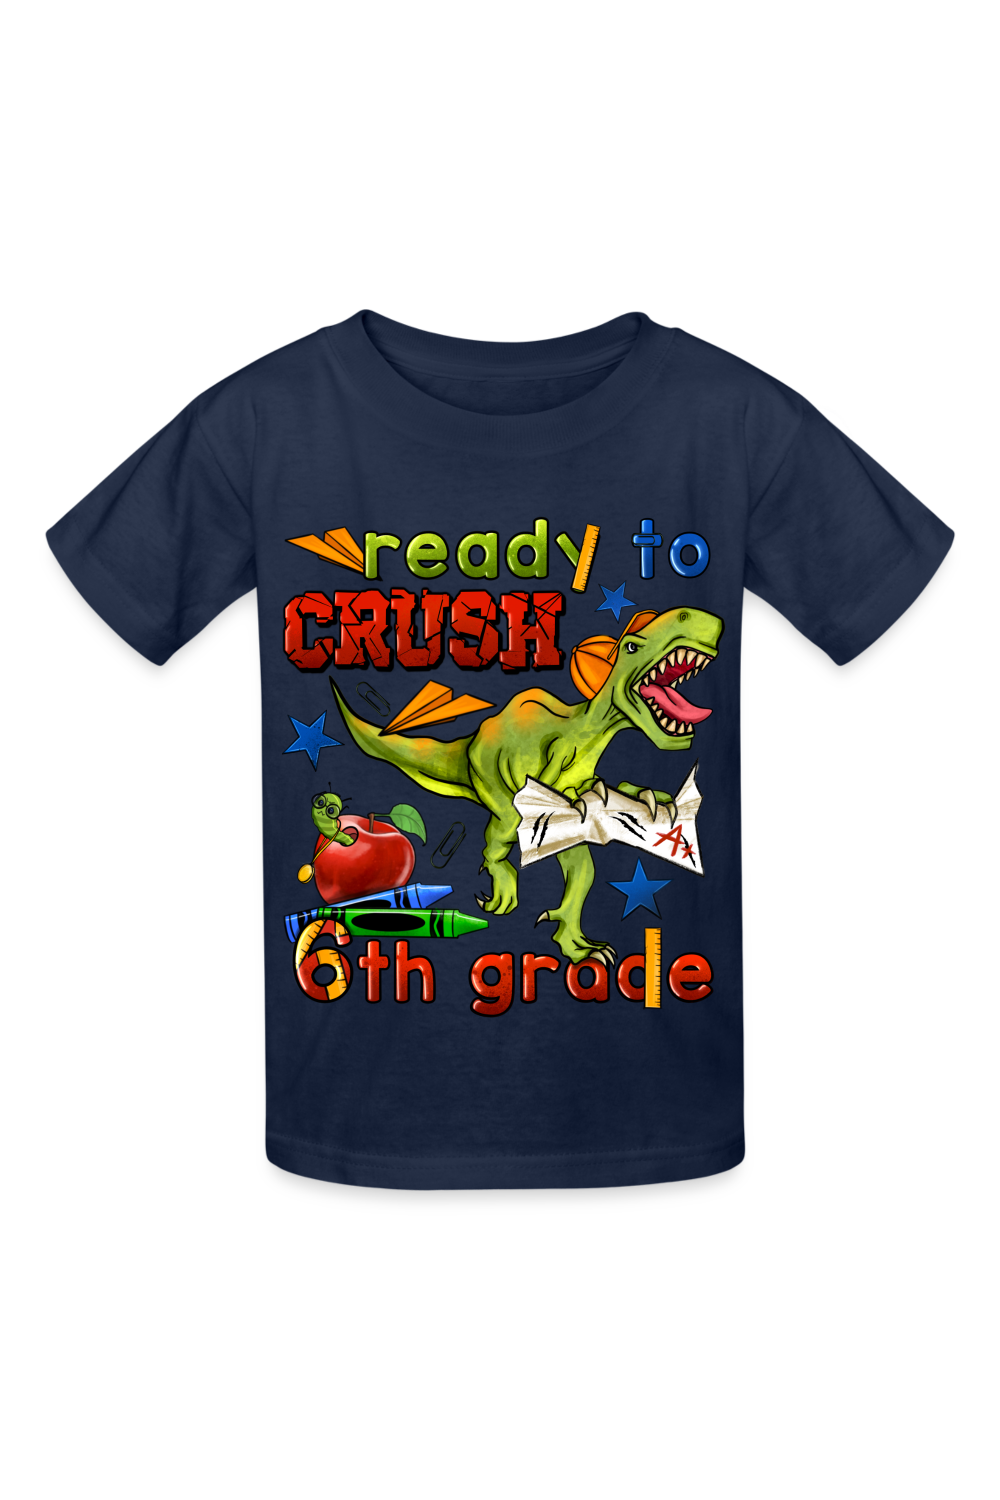 Boys Ready To Crush Six Grade Short Sleeve Tee Shirts for Back To School - navy - NicholesGifts.online